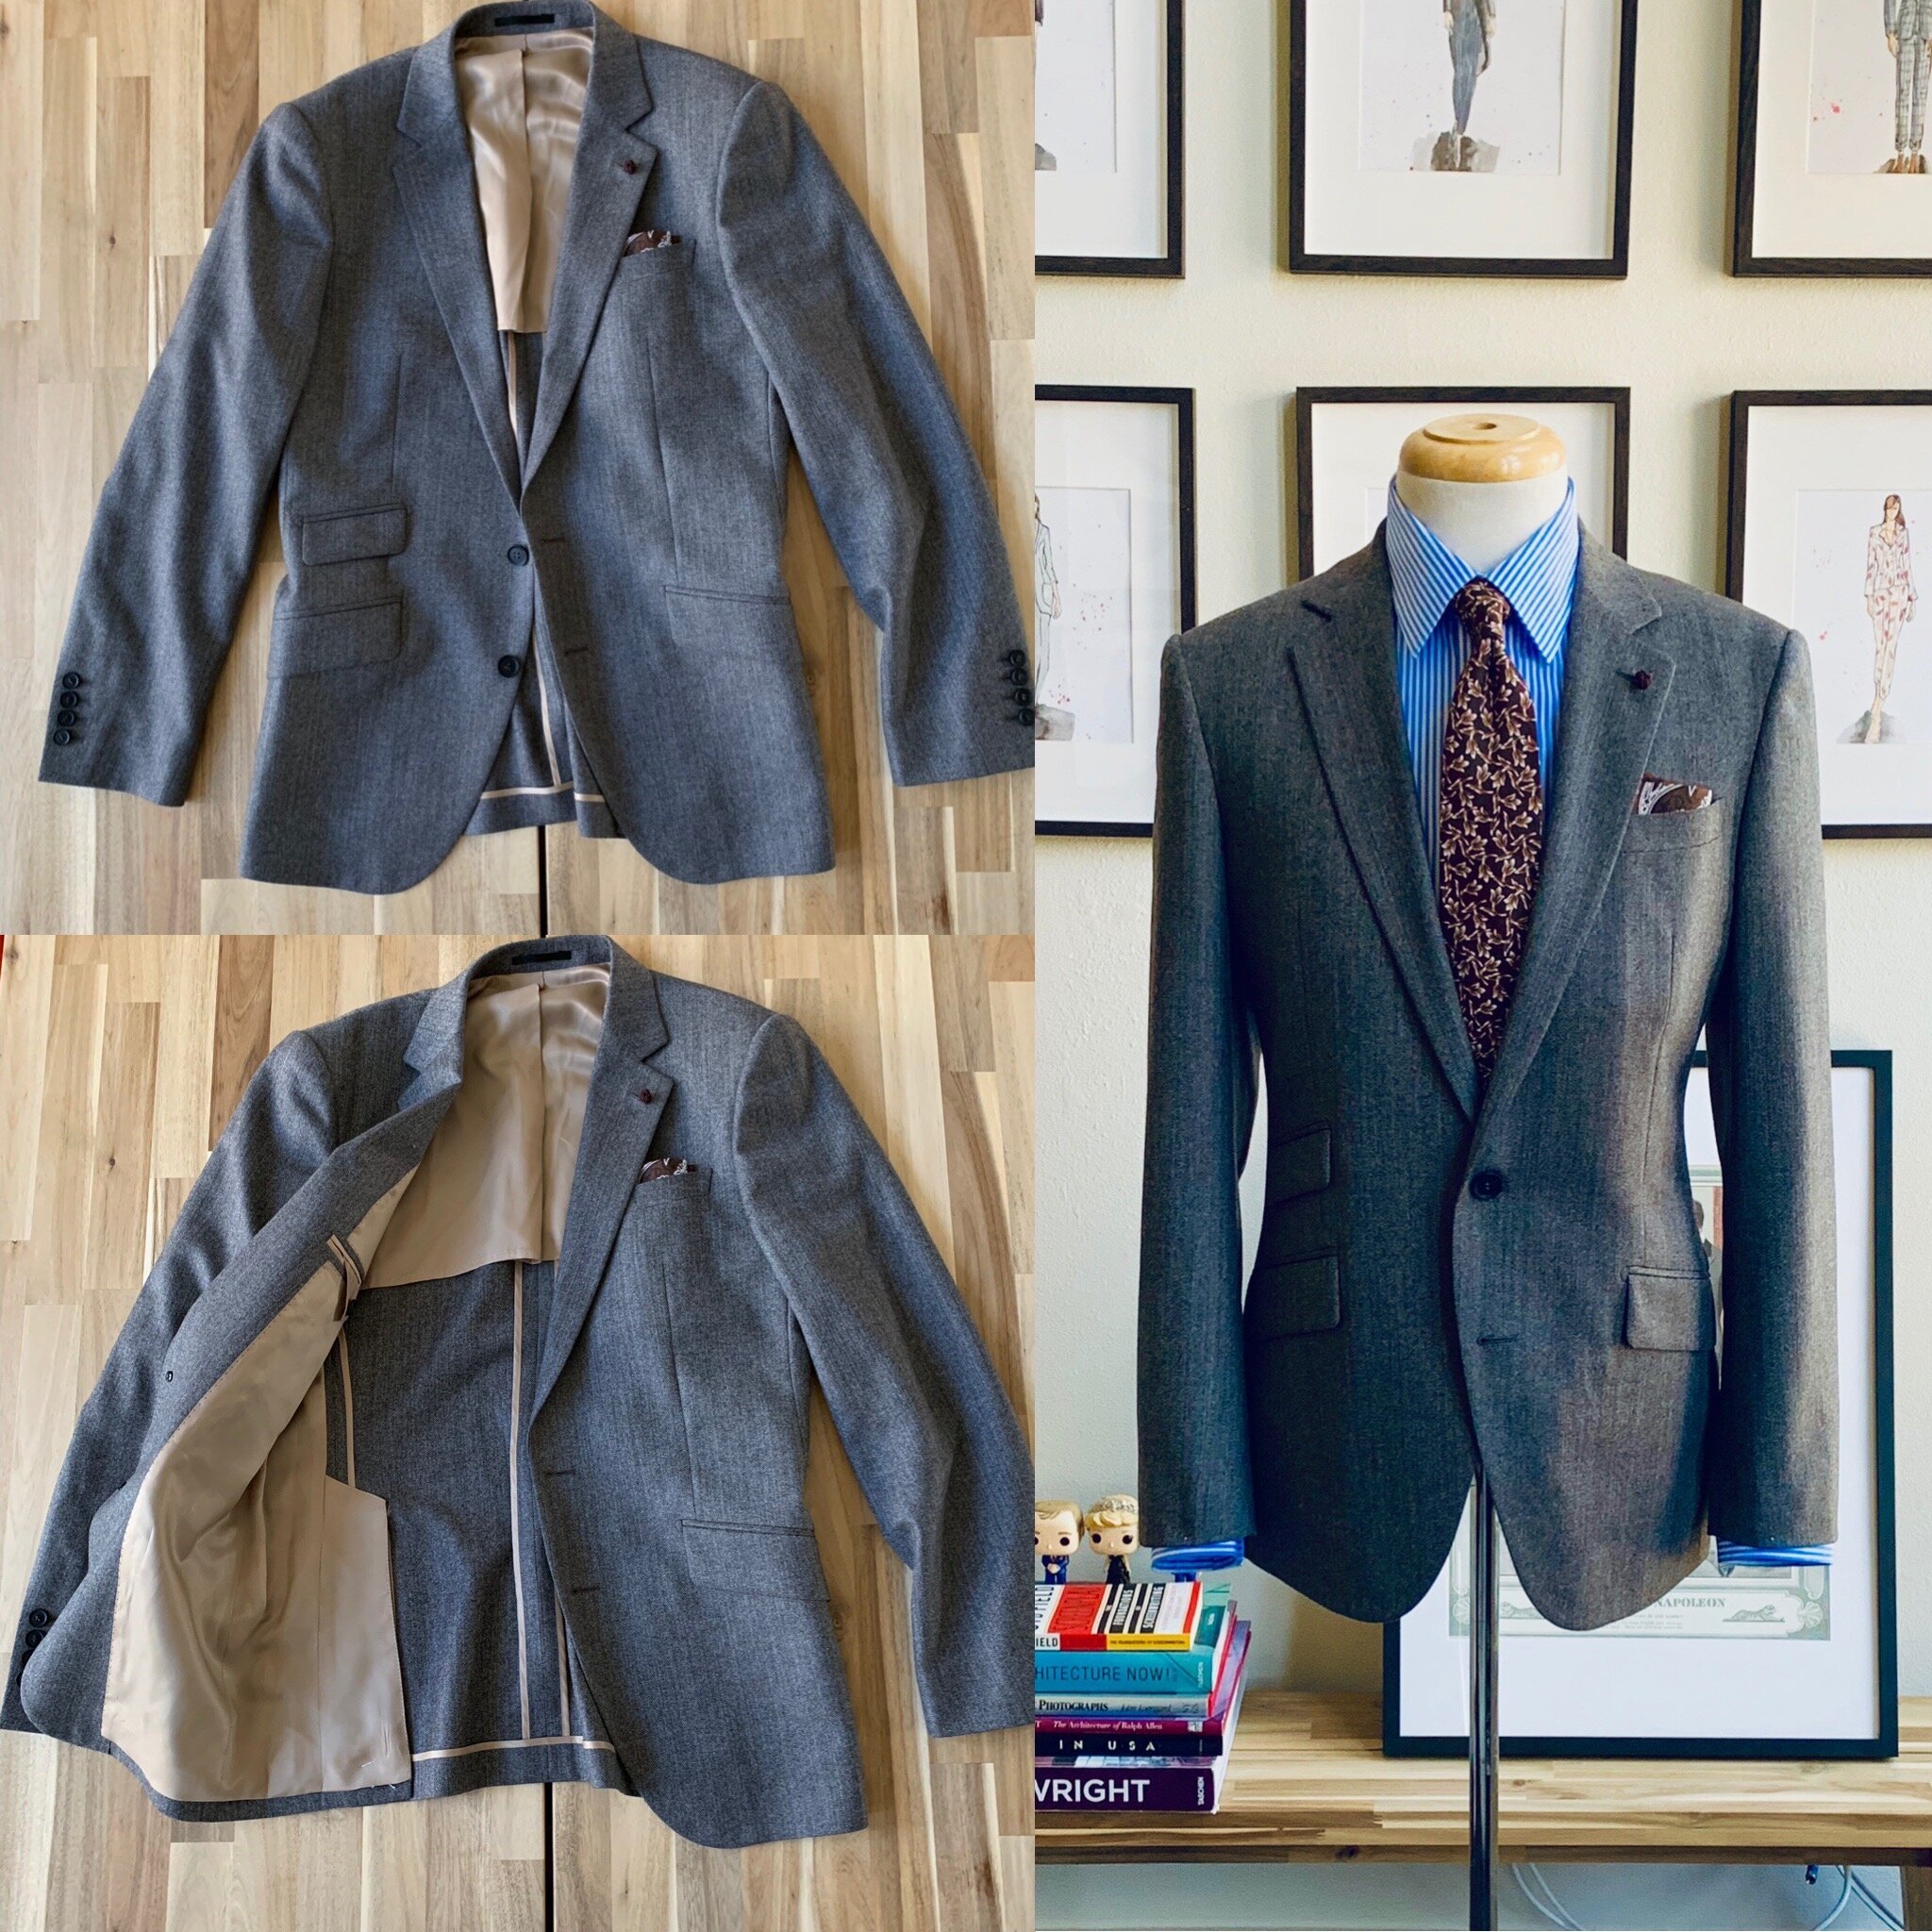 Blazers and Sport Coats for Men and Women — Bespoke Custom Suits Hand Made  in Los Angeles